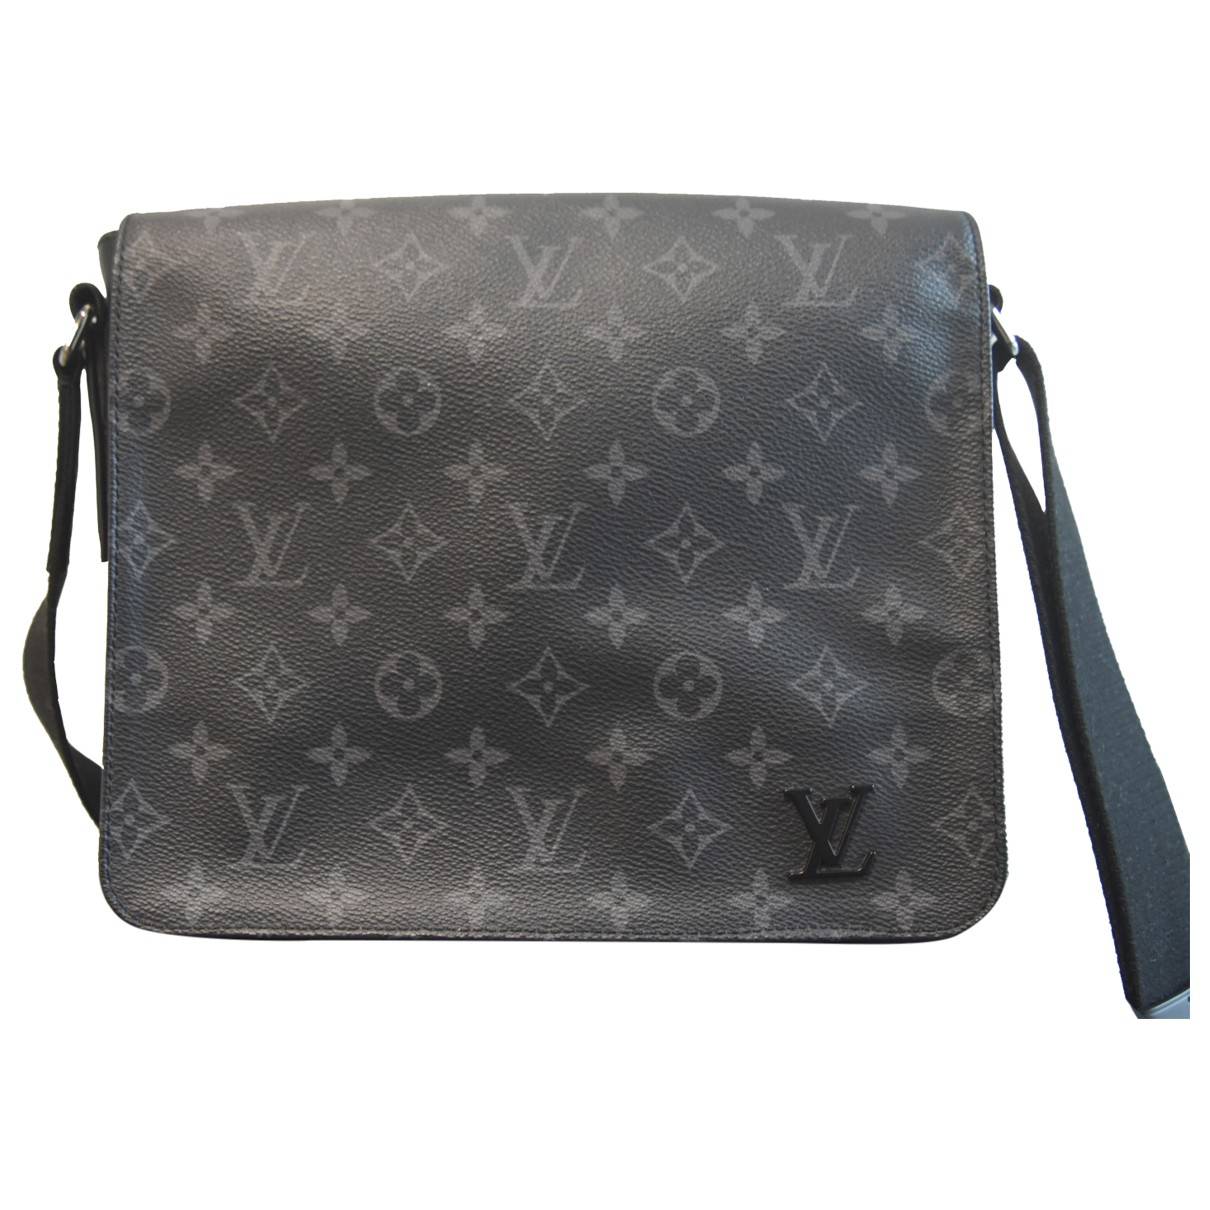 District leather travel bag Louis Vuitton Black in Leather - 28941155